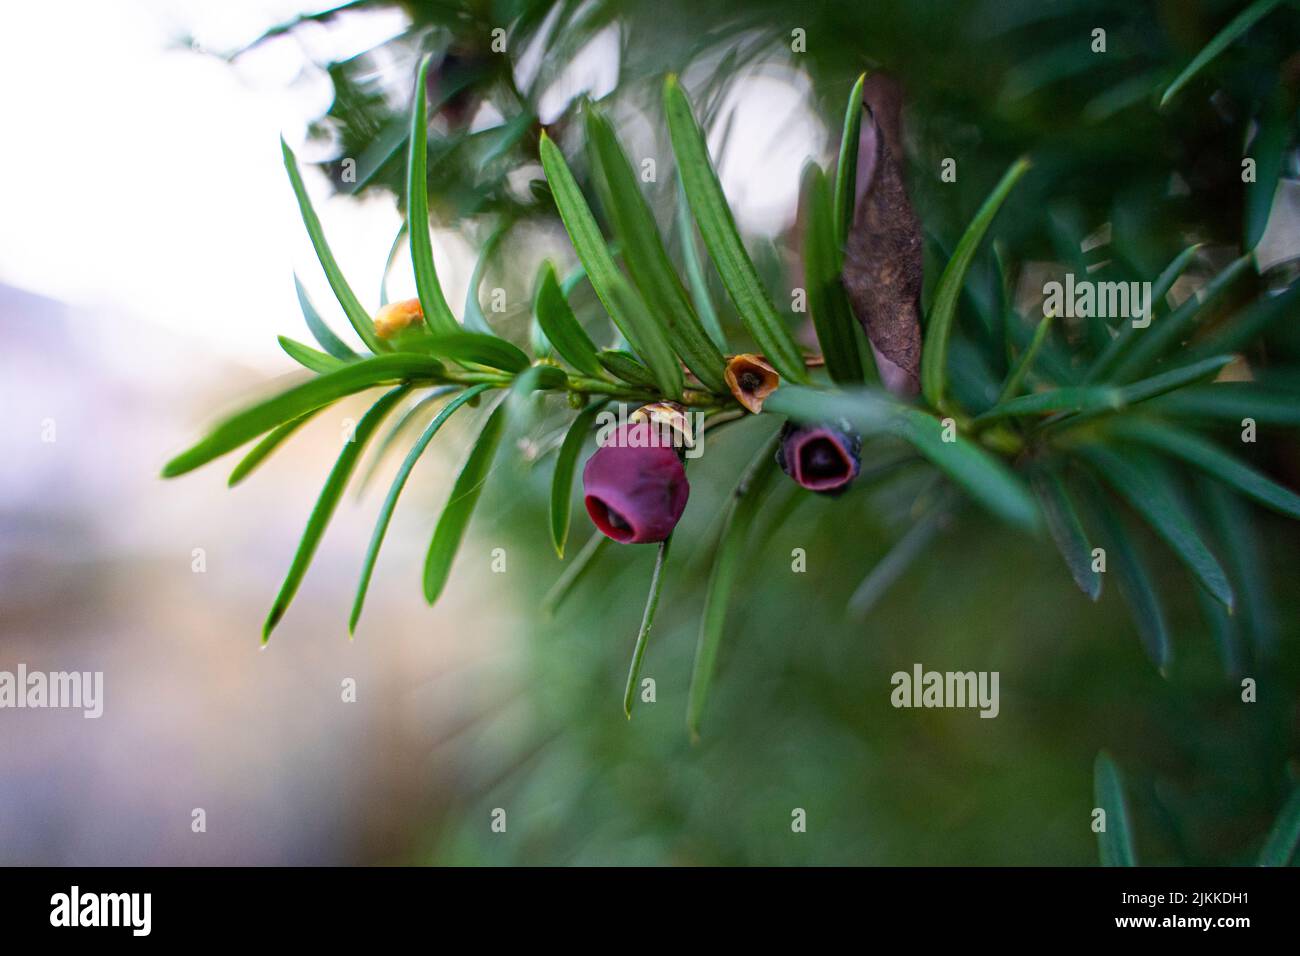 A closeup shot of a common yew on the blurry background Stock Photo